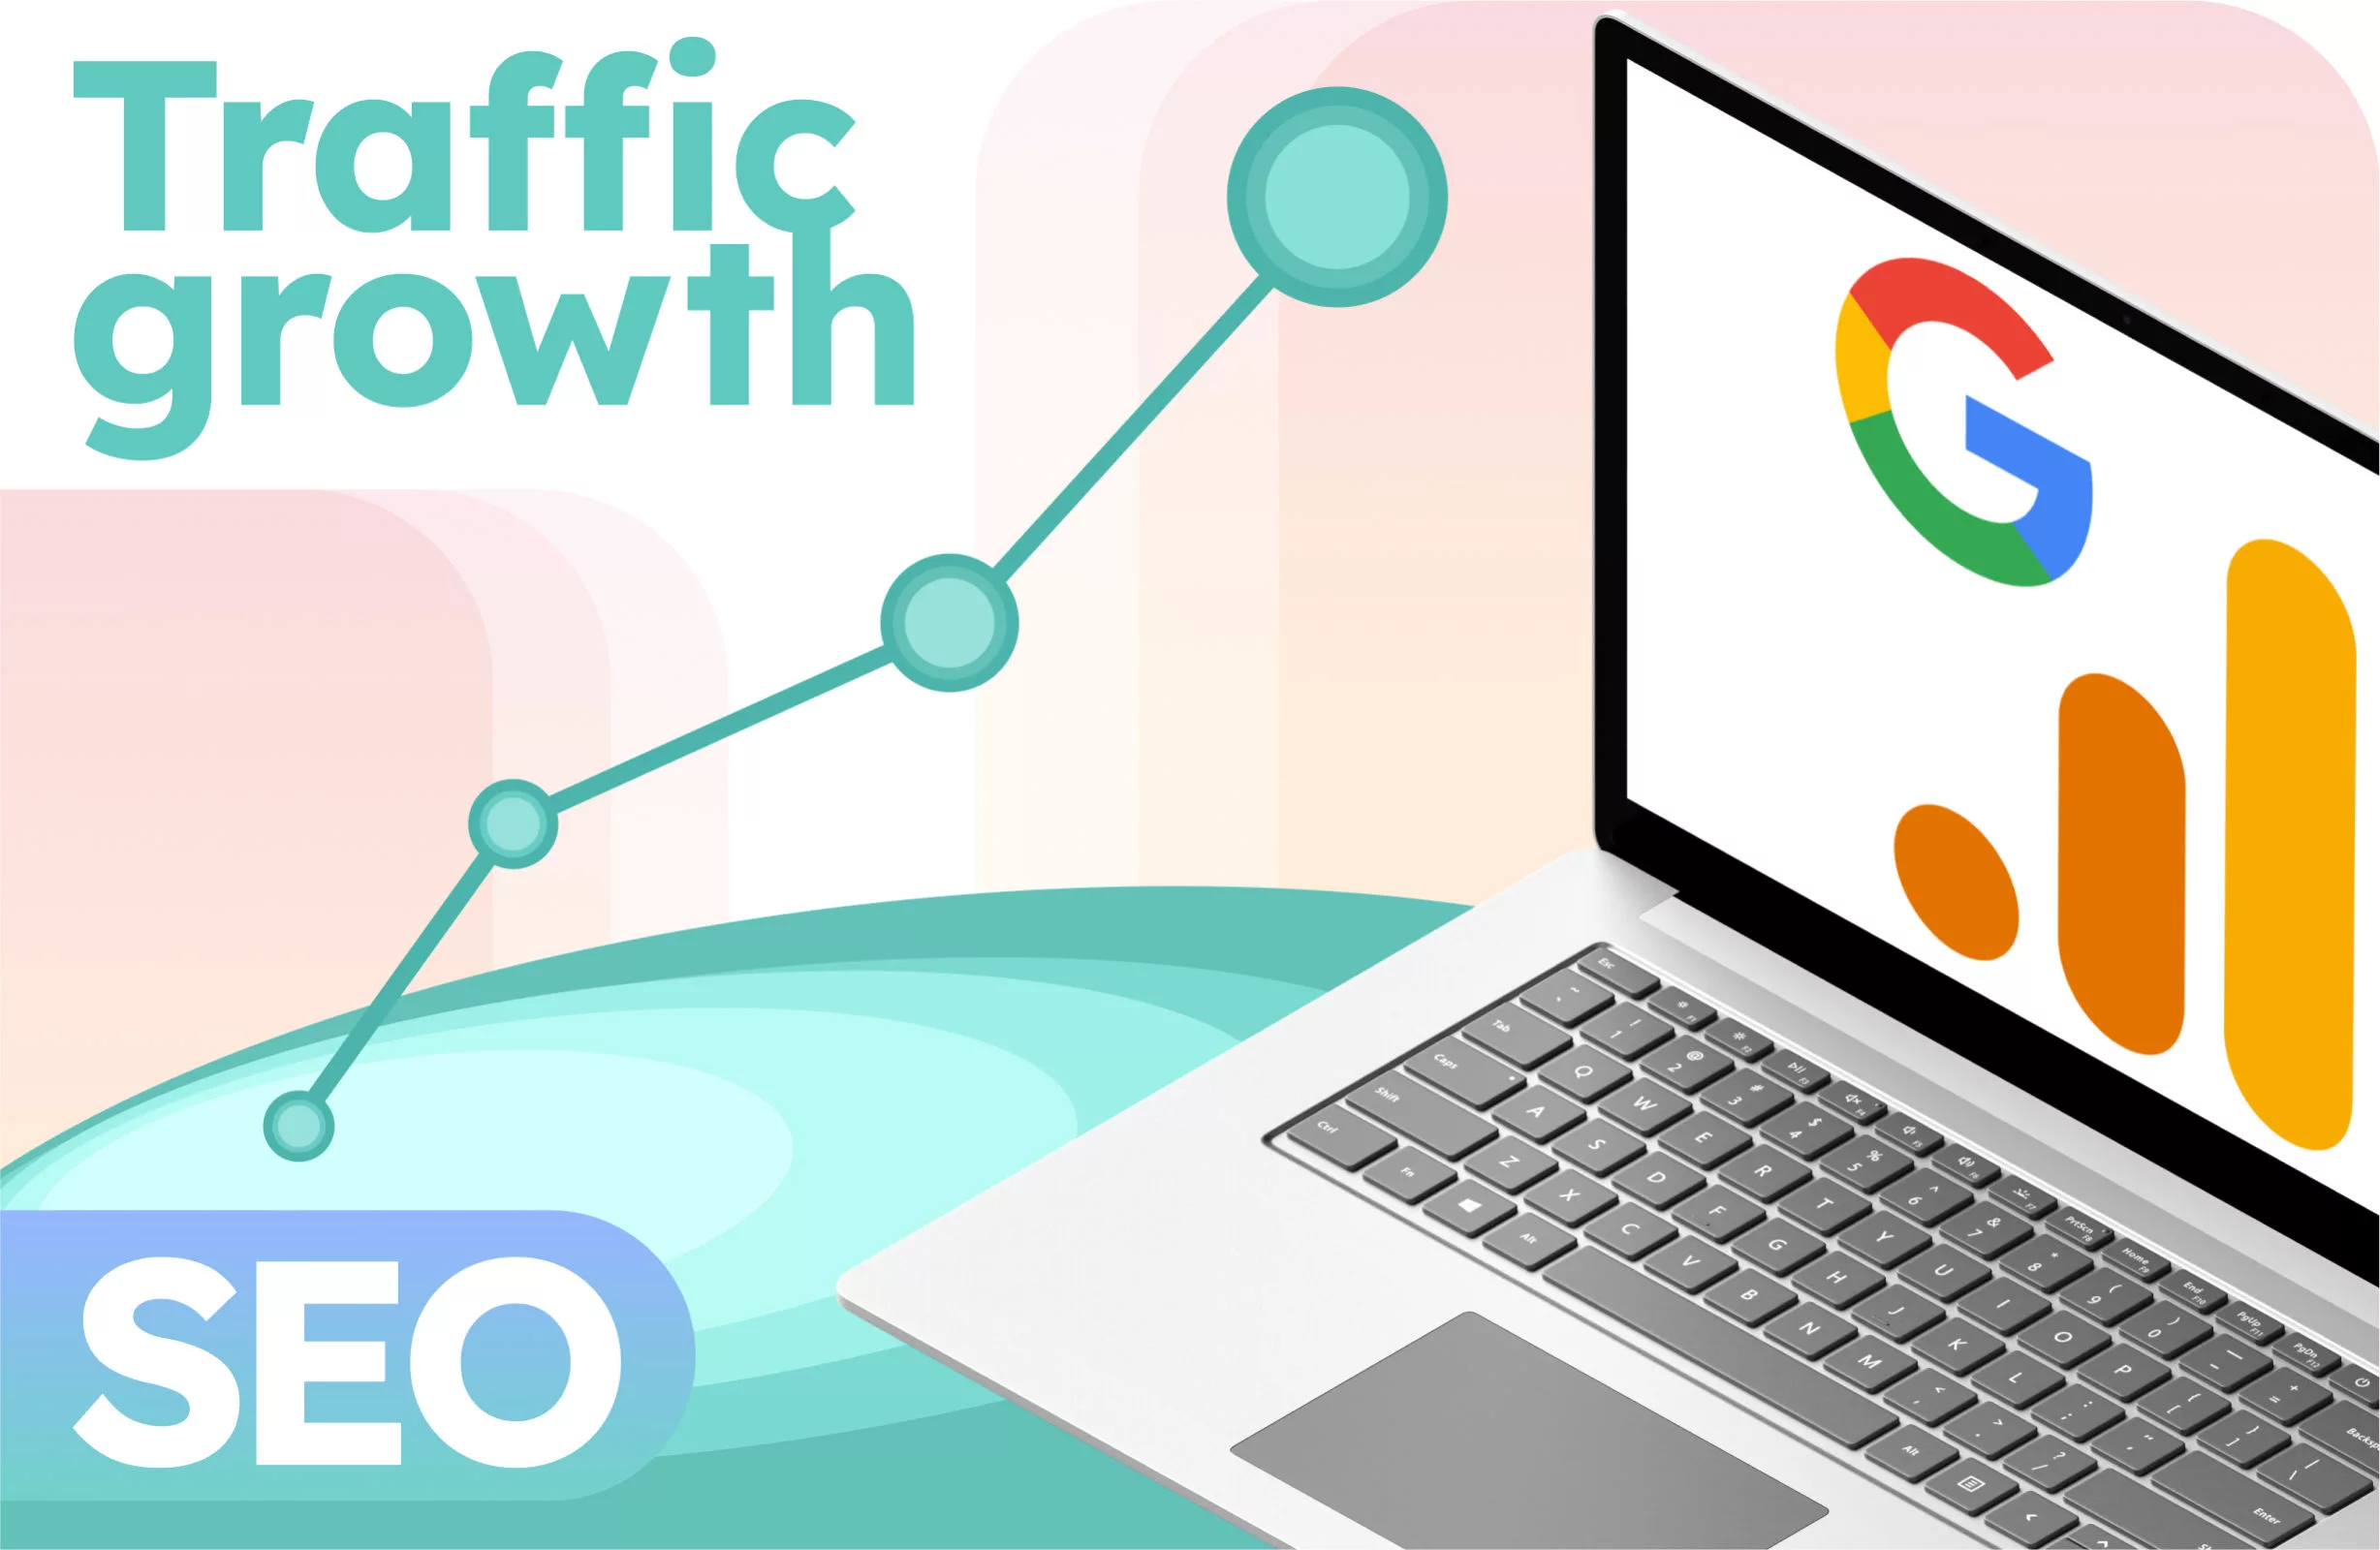 SEO — Finding traffic growth points is better than running audits